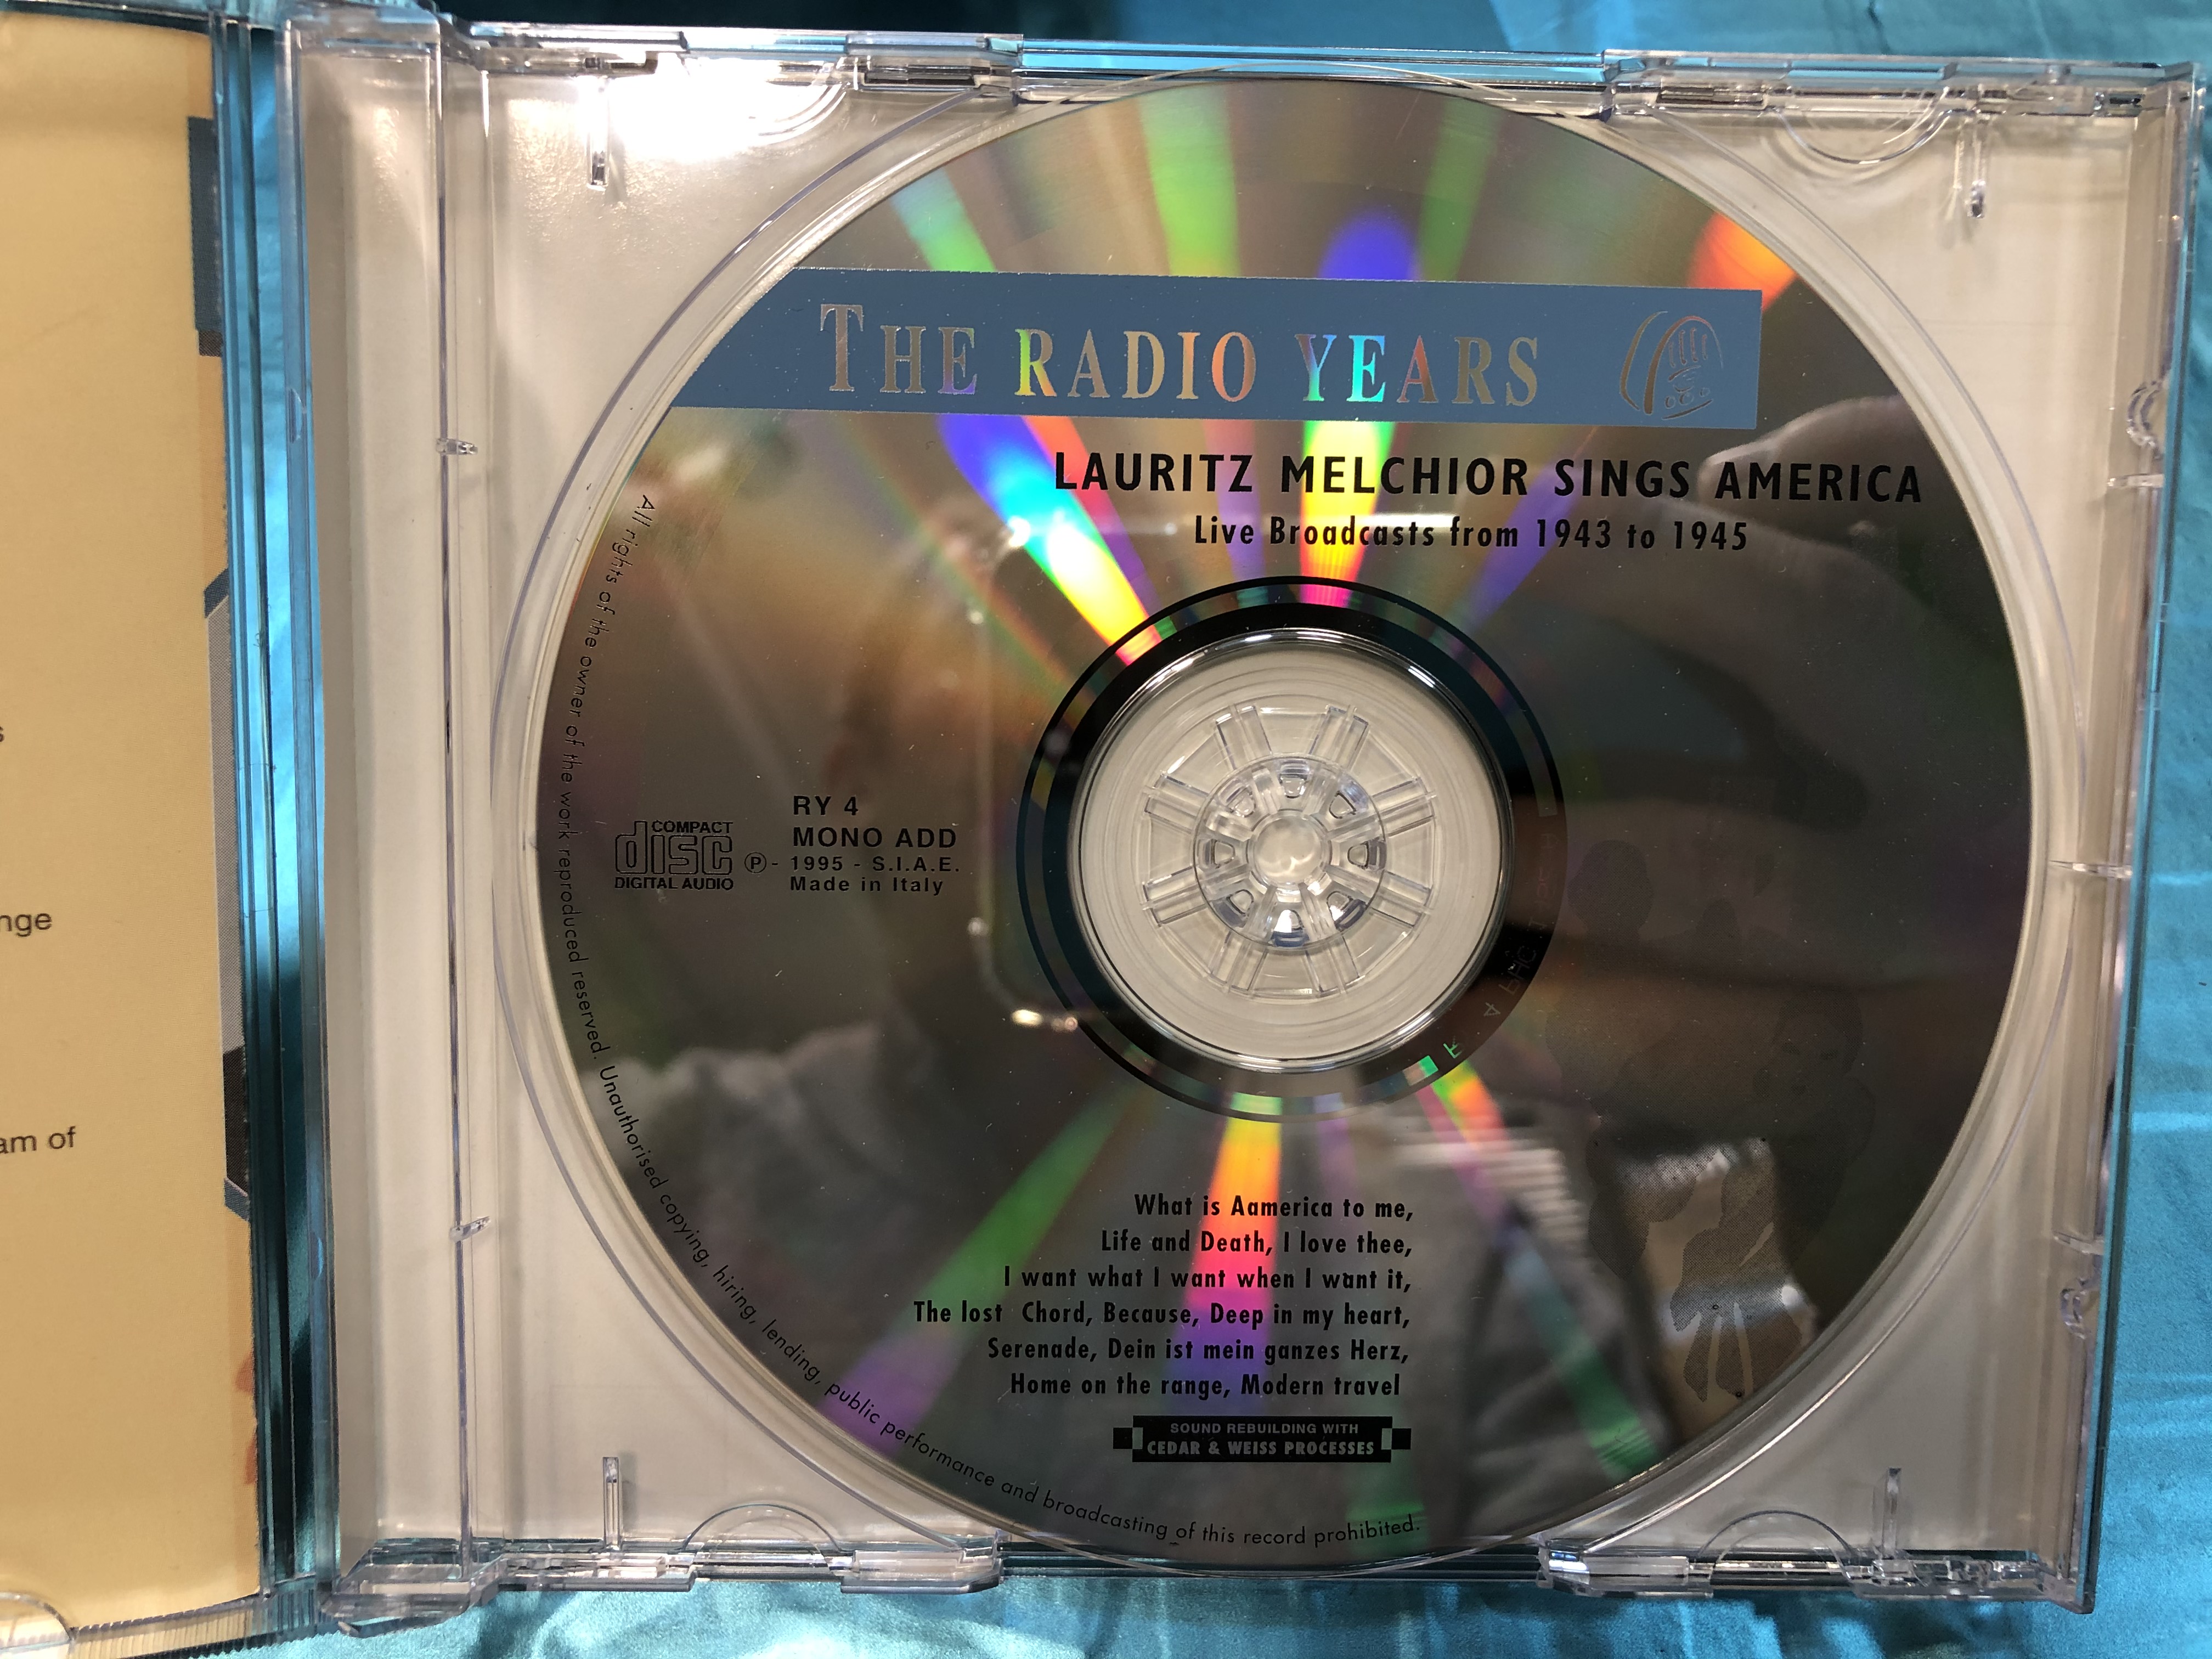 the-radio-years-1945-1995-anniversary-of-the-end-of-the-second-world-war-lauritz-melchior-sings-america-live-broadcasts-from-1943-to-1945-the-radio-years-audio-cd-1995-mono-ry-4-3-.jpg